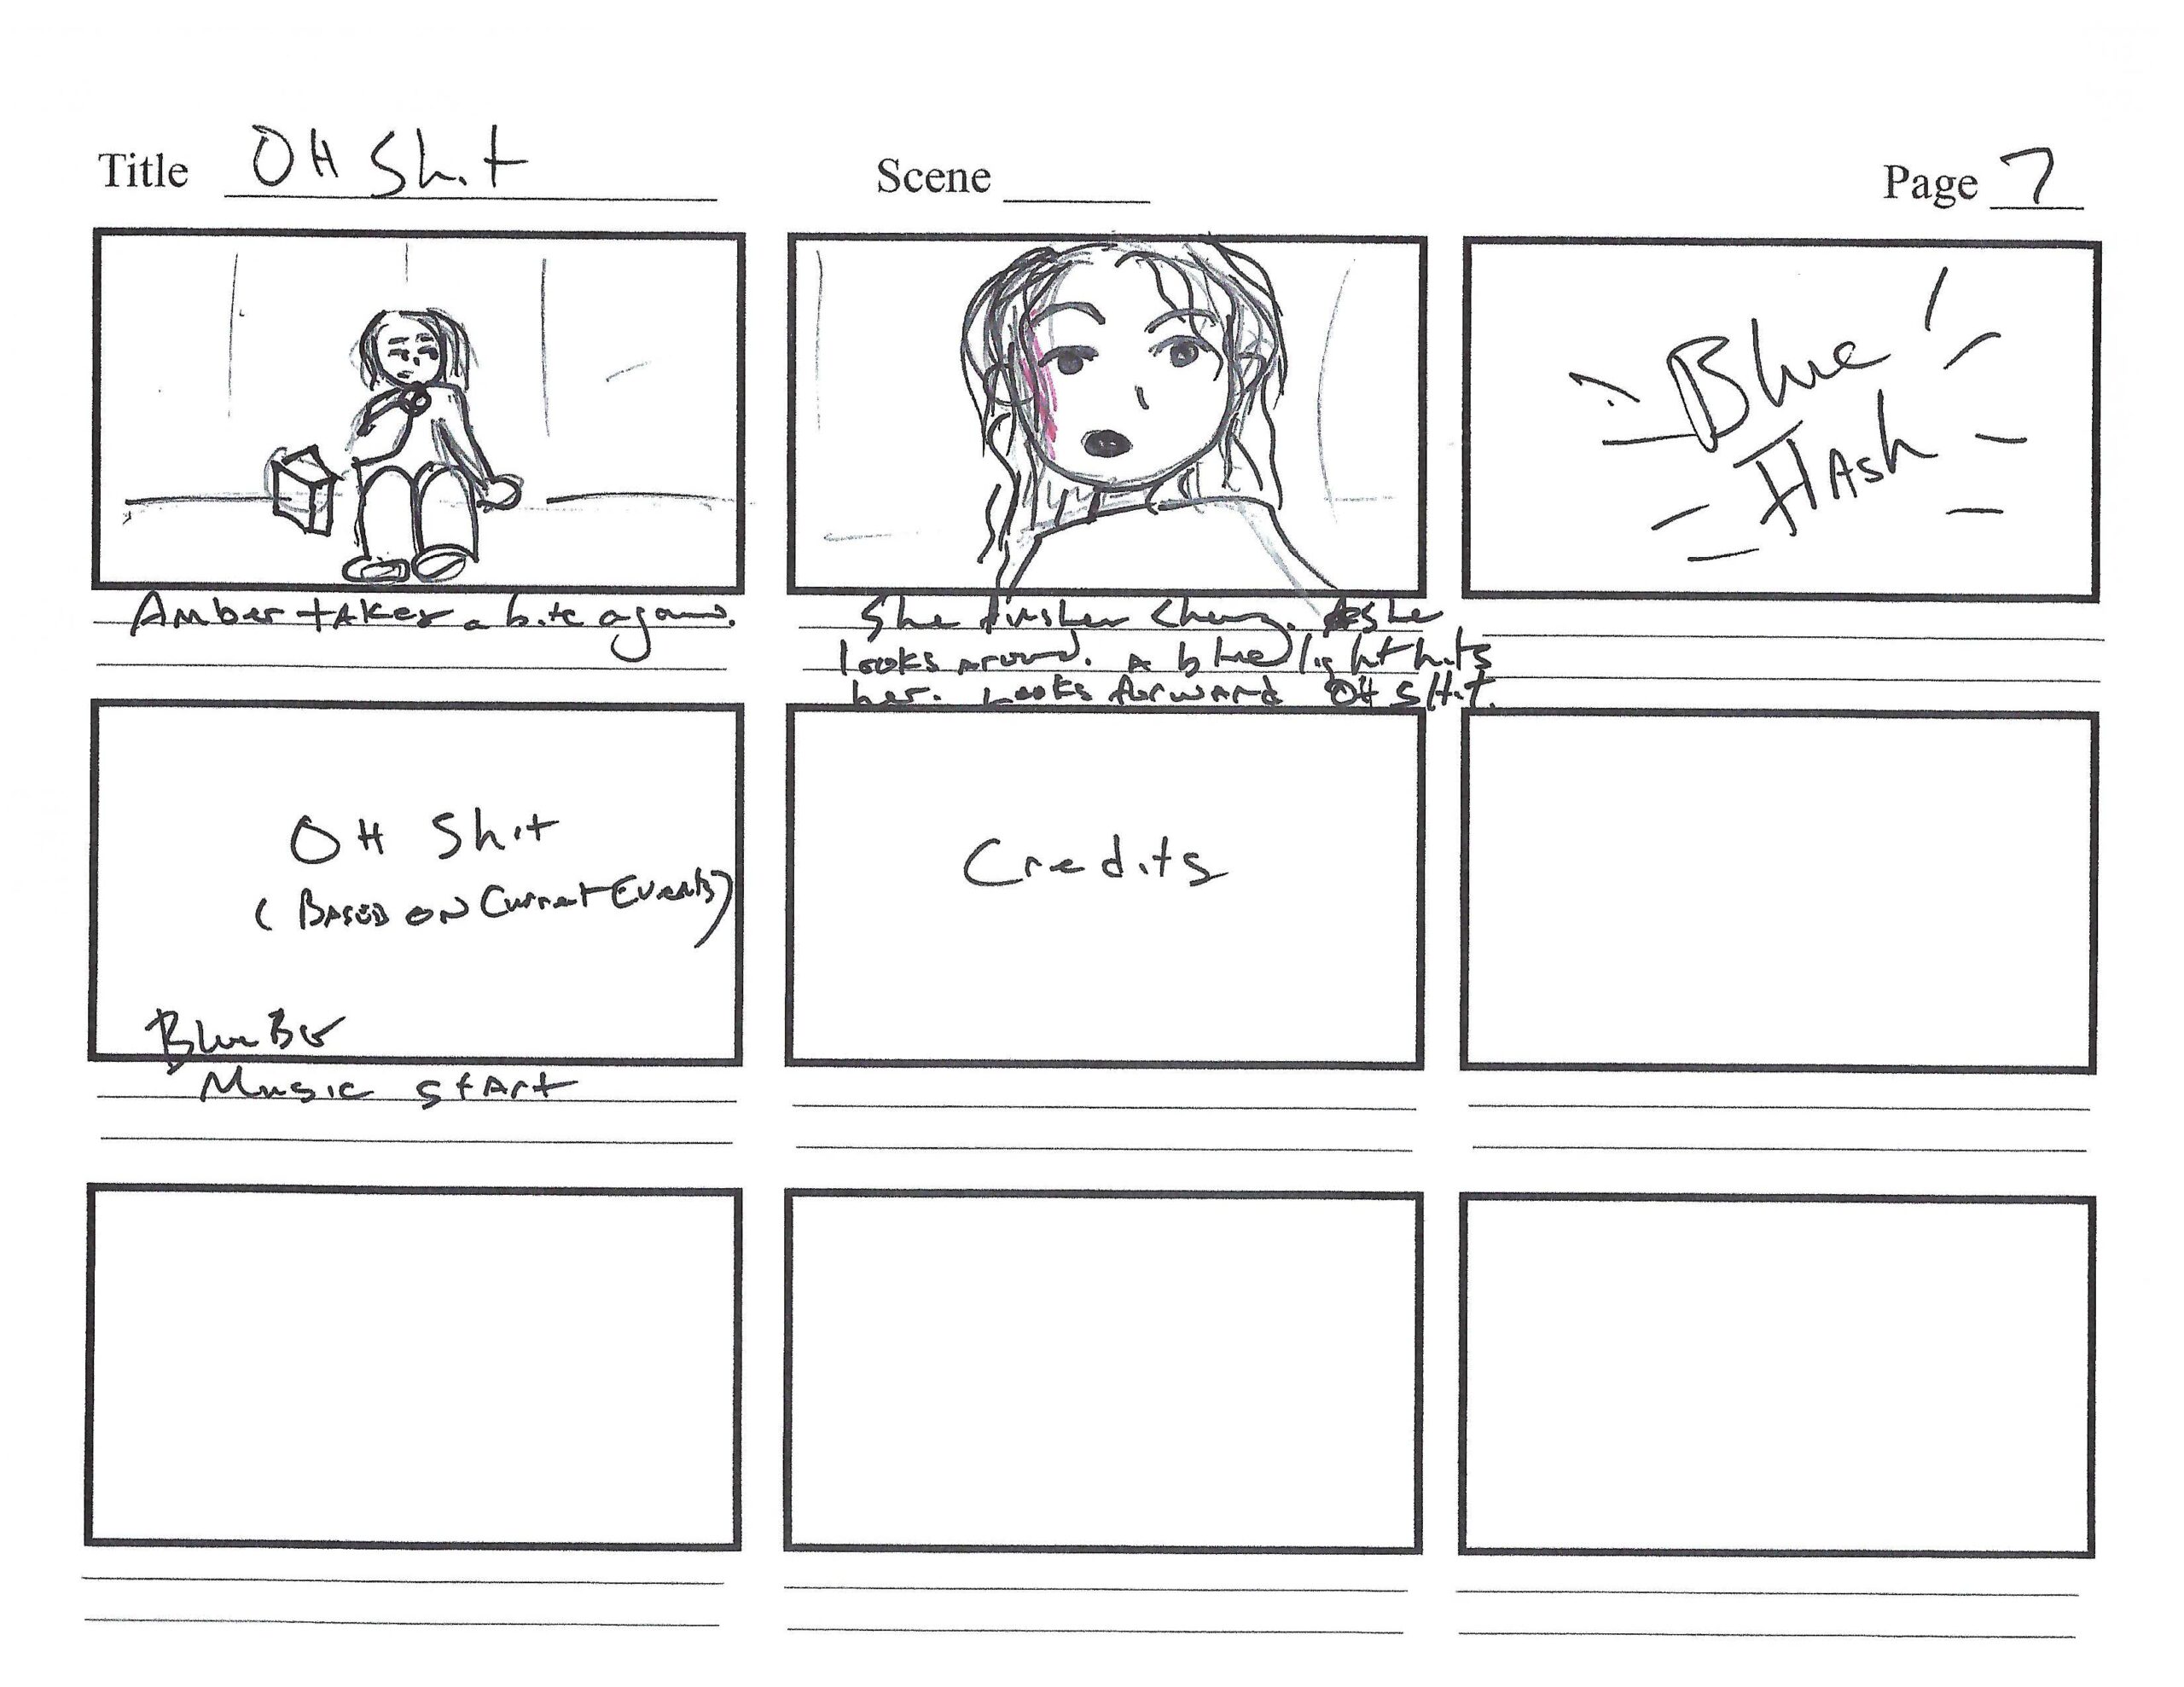 OhShitStoryboards_Page_7